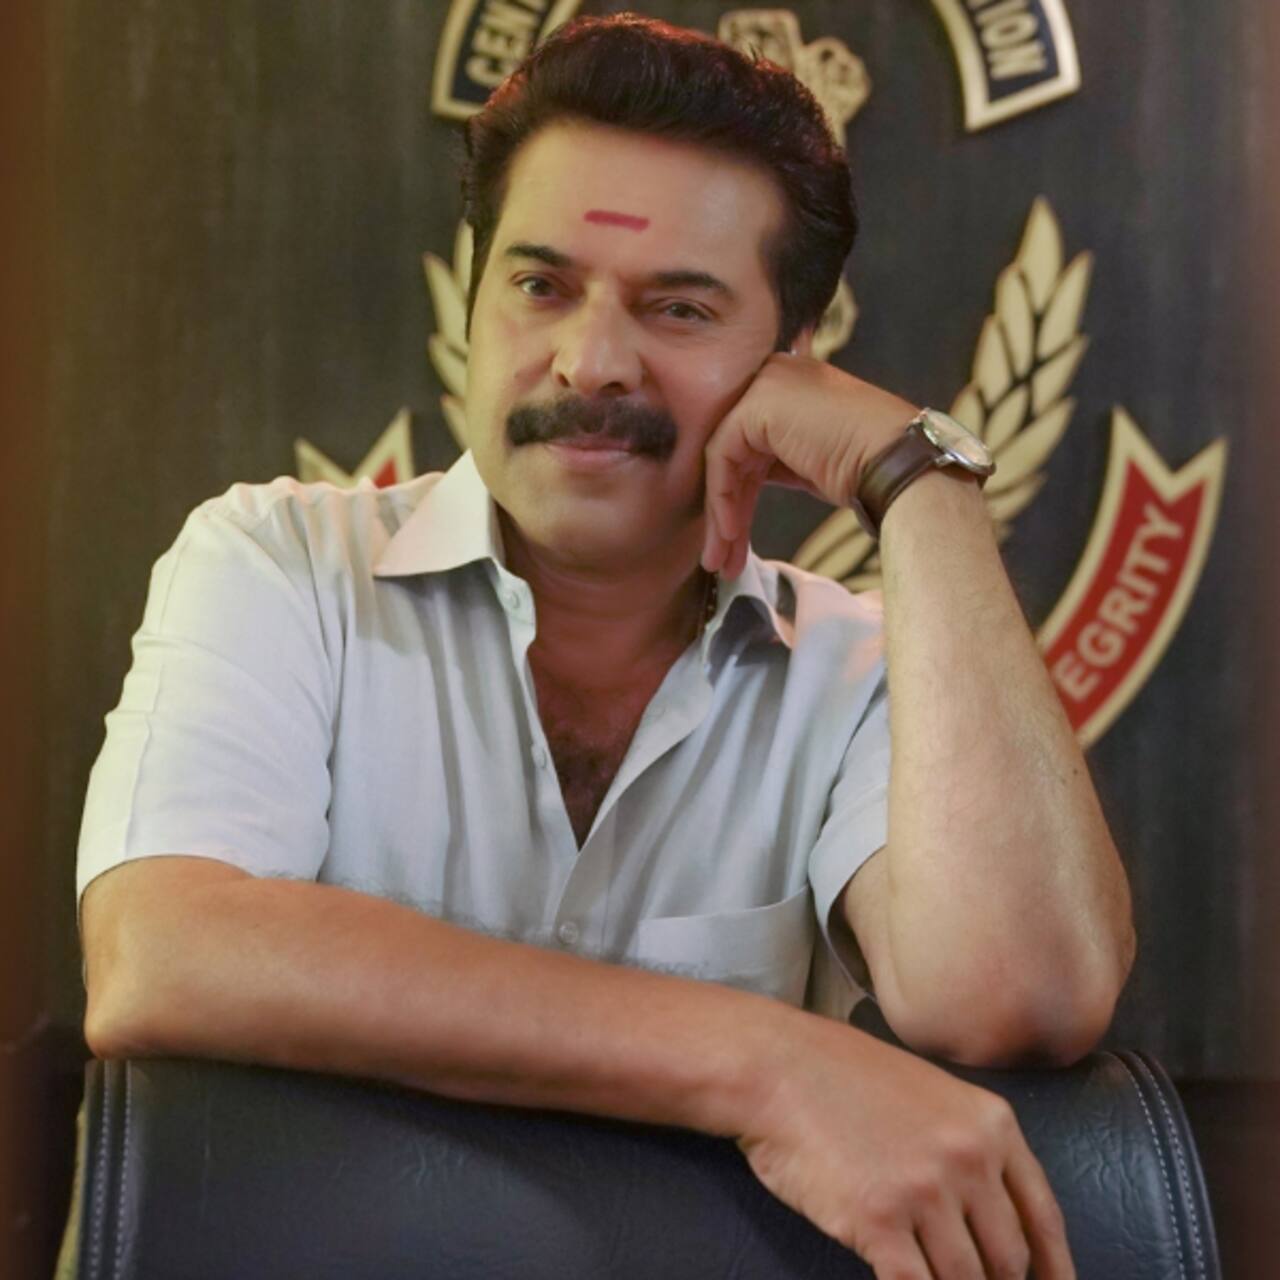 CBI 5: The Brain teaser - Mammootty returns as Sethurama Iyer after 17 years; fans cannot wait for the new thriller instalment 